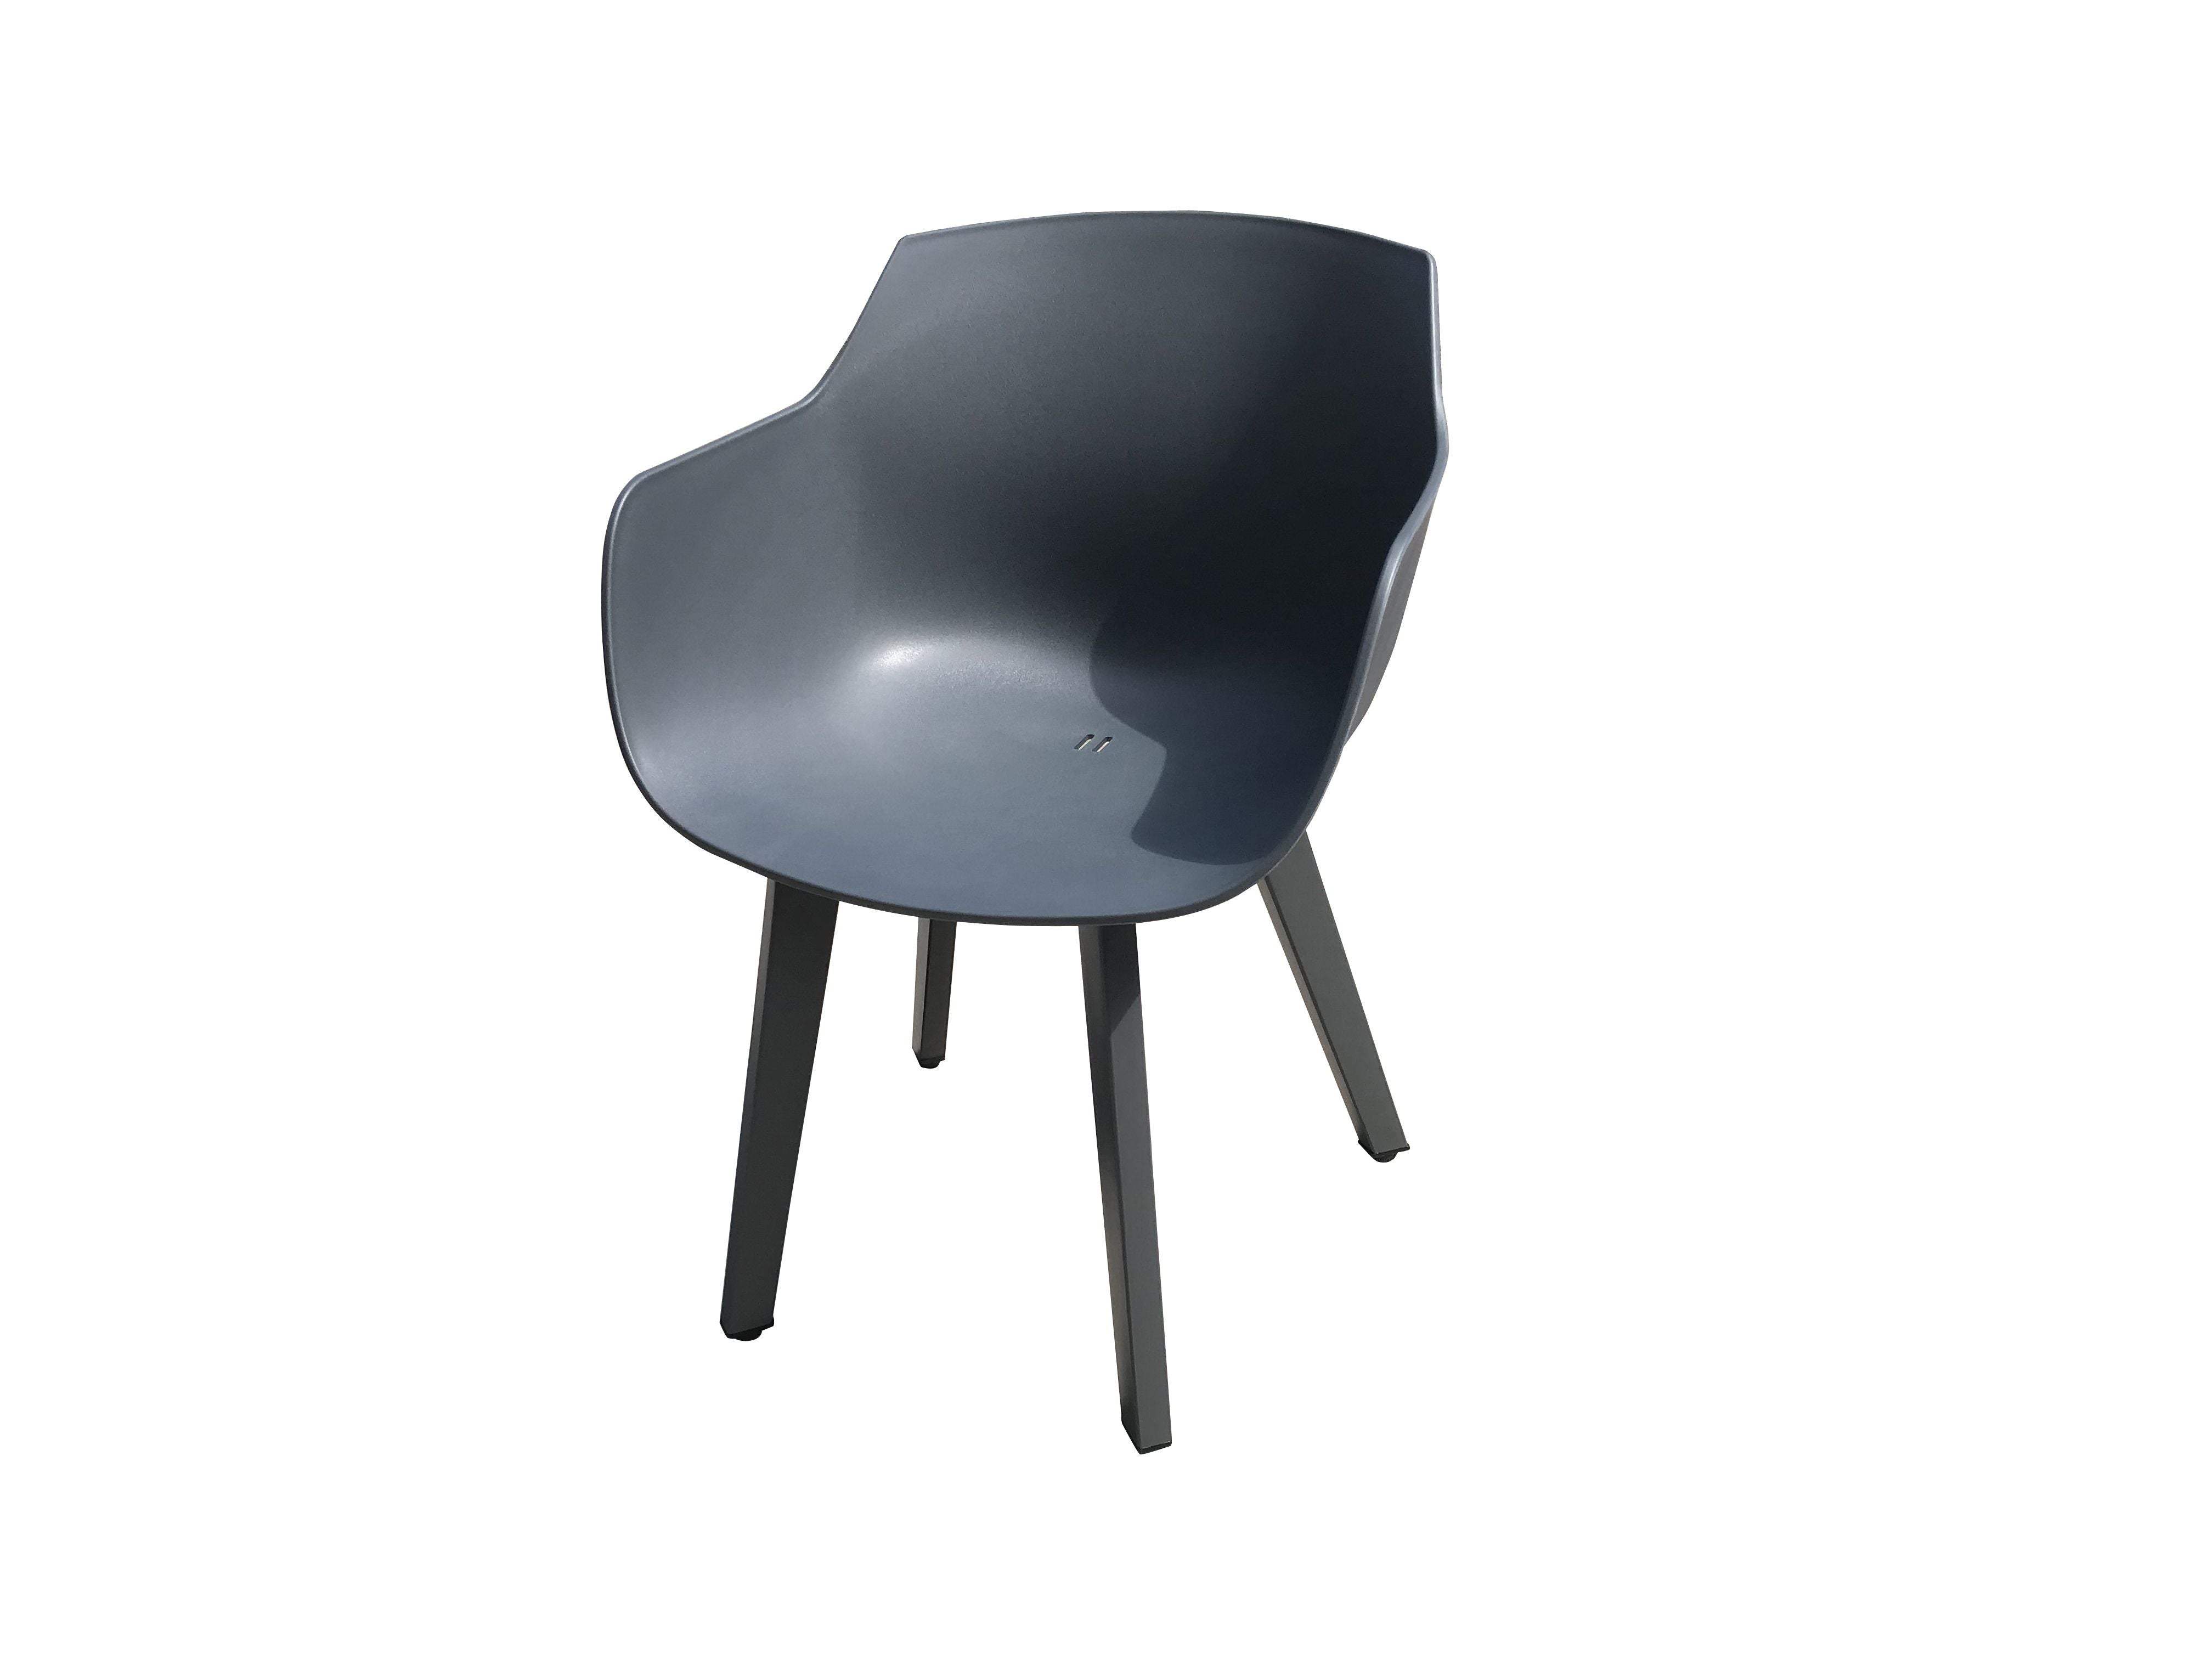 PatioZone Molded Plastic Armchair with Aluminum Frame (MOSS-0001C) - Charcoal